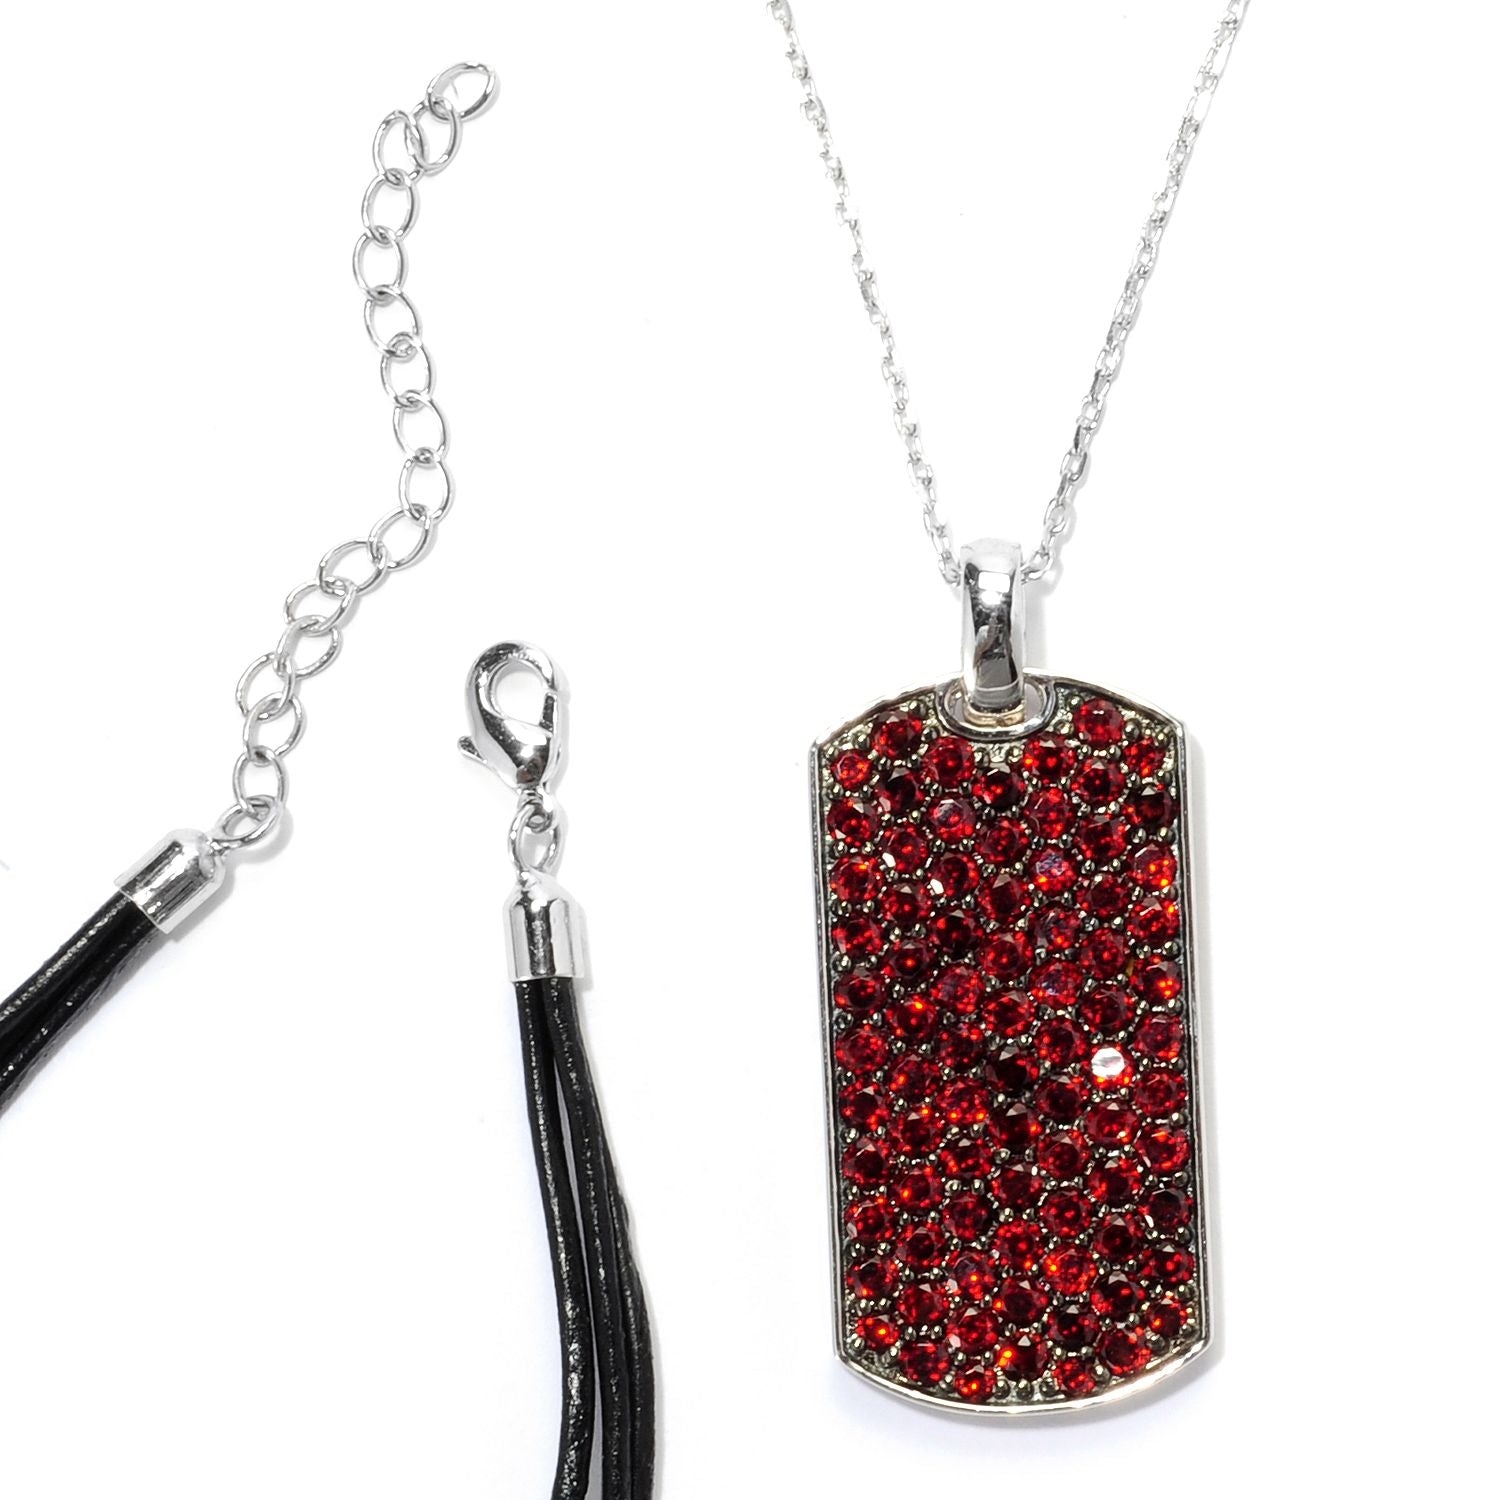 Sterling Silver Pave Red Garnet Necklace with Chain and Cord - Pinctore